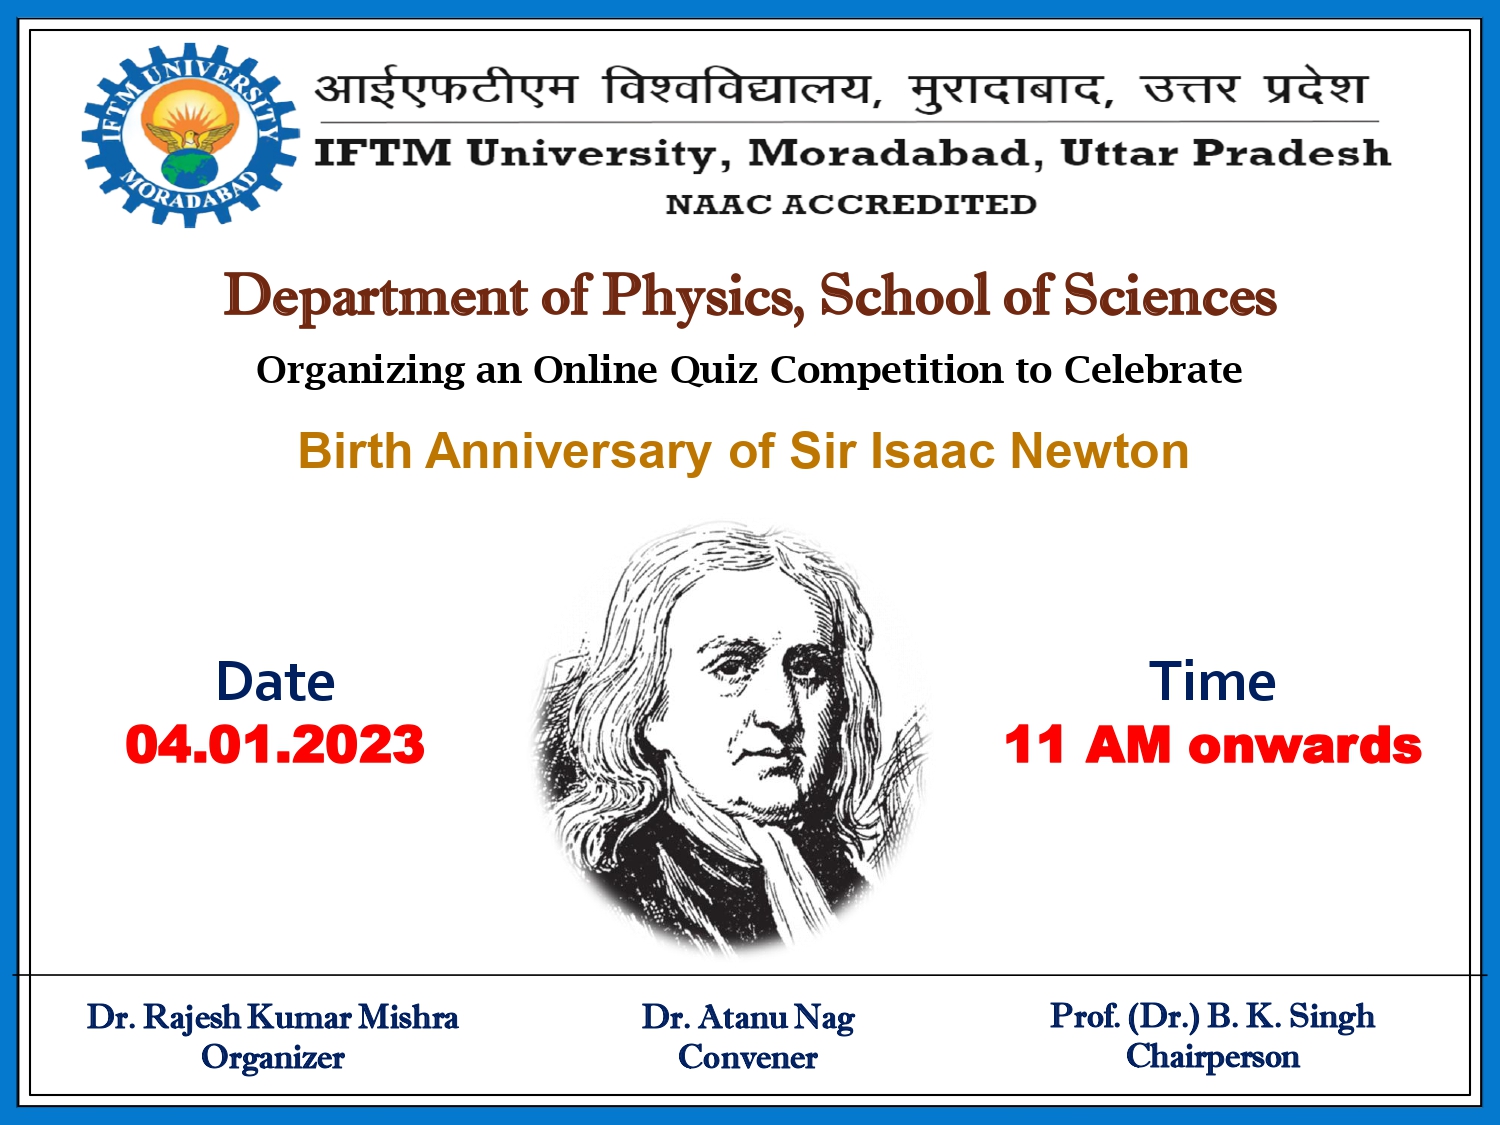 Online Quiz Competition to Celebrate Birth Anniversary of Sir Isaac Newton